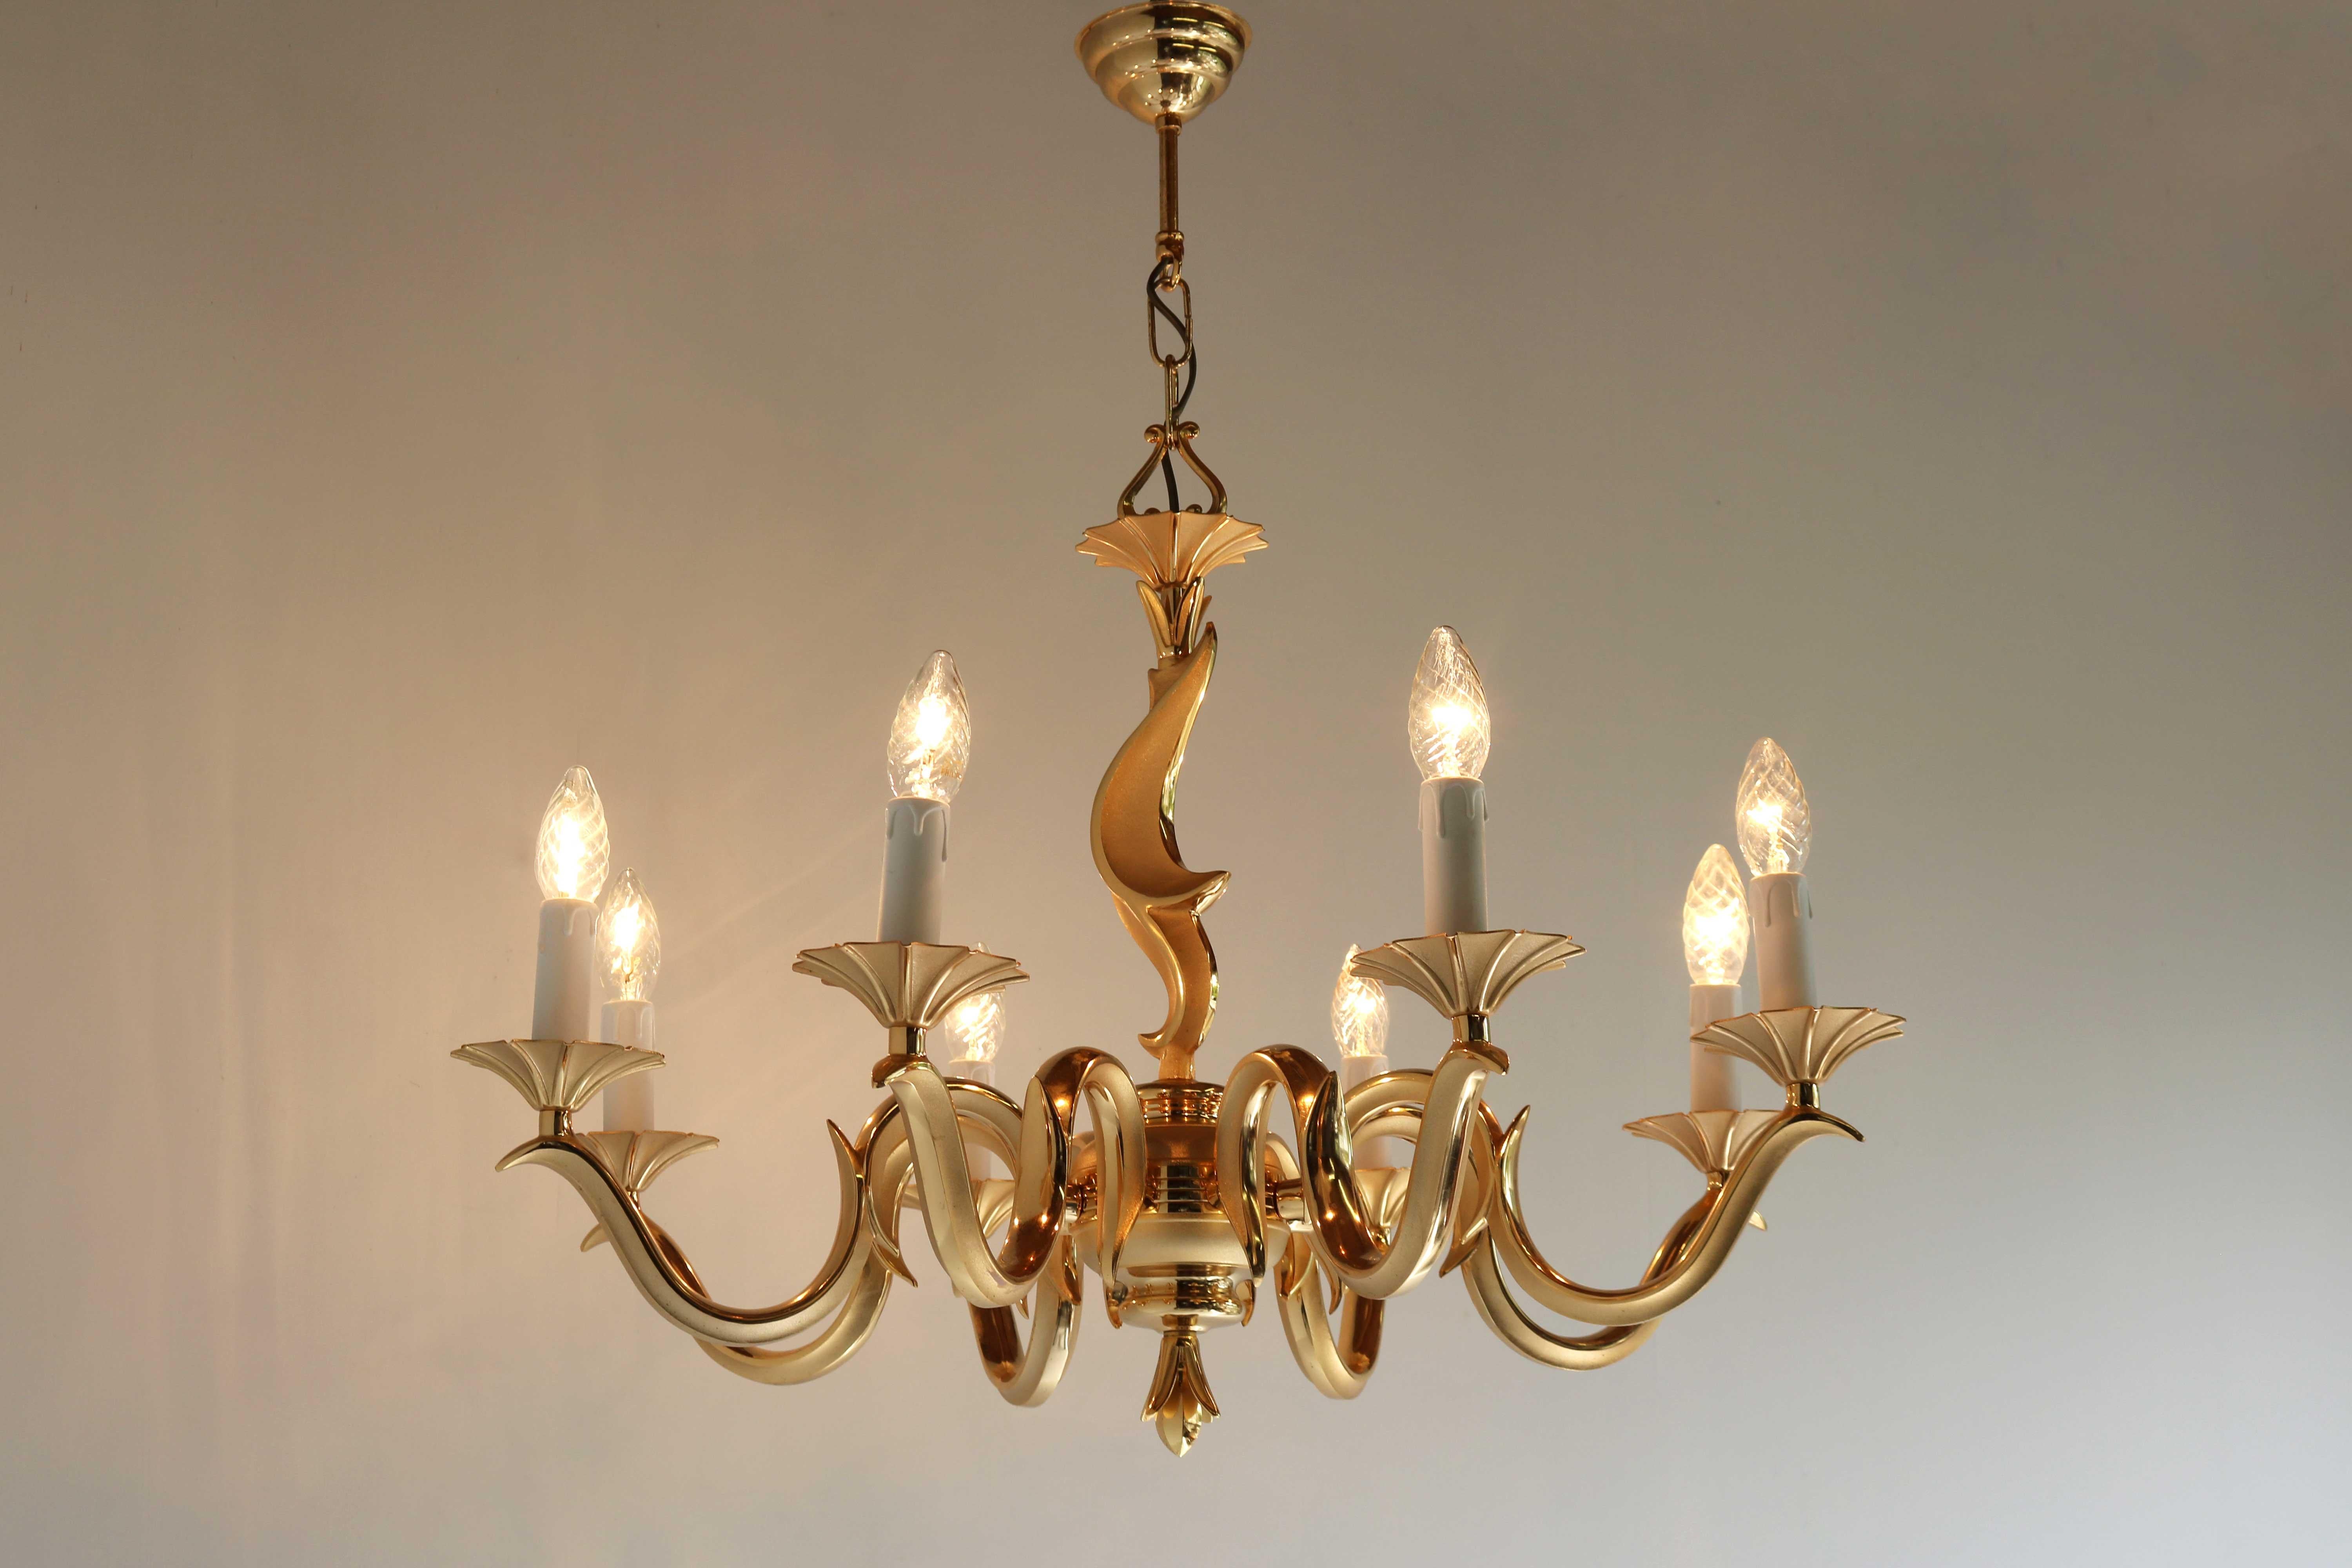 French Couple / Set Golden Chandeliers Hollywood Regency Style Metal/ Brass 1970s 
Elegant Hollywood Regency style set golden chandeliers, couple presented in French Gold and Satin finishes, to enhance the ribs of the individual leaves.
Both in good